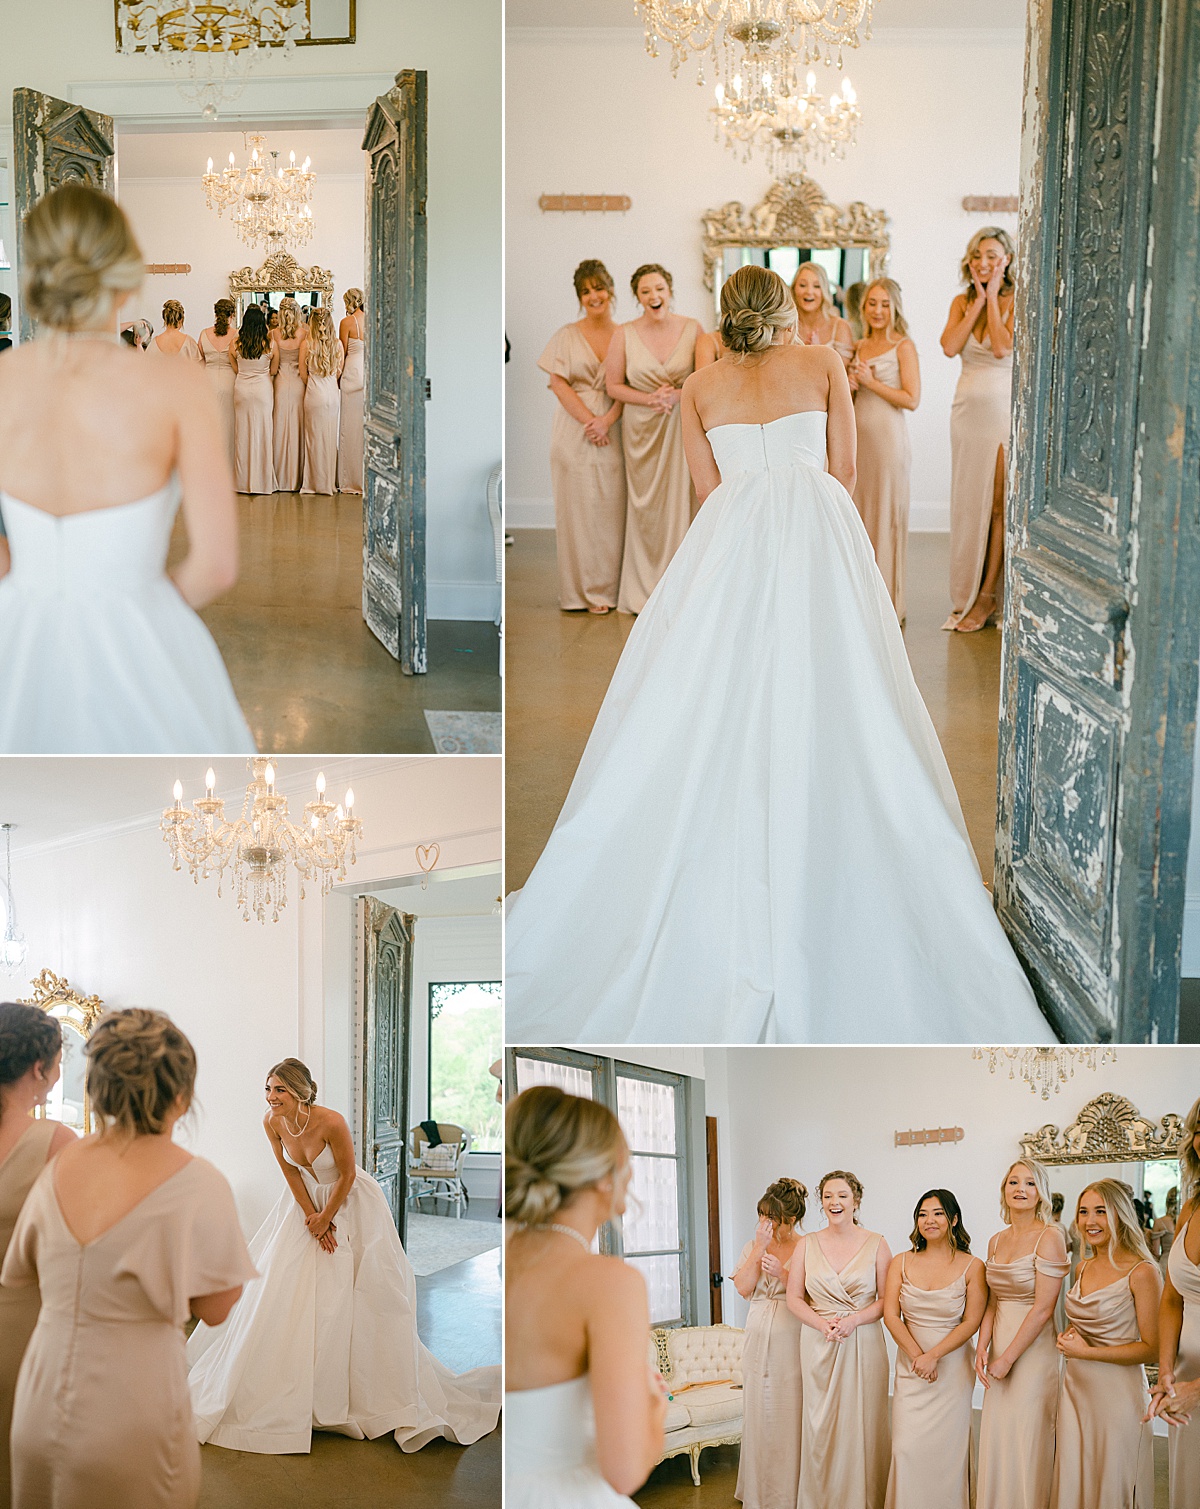 Exciting first look moment between the bride and her six bridesmaids before the ceremony. 